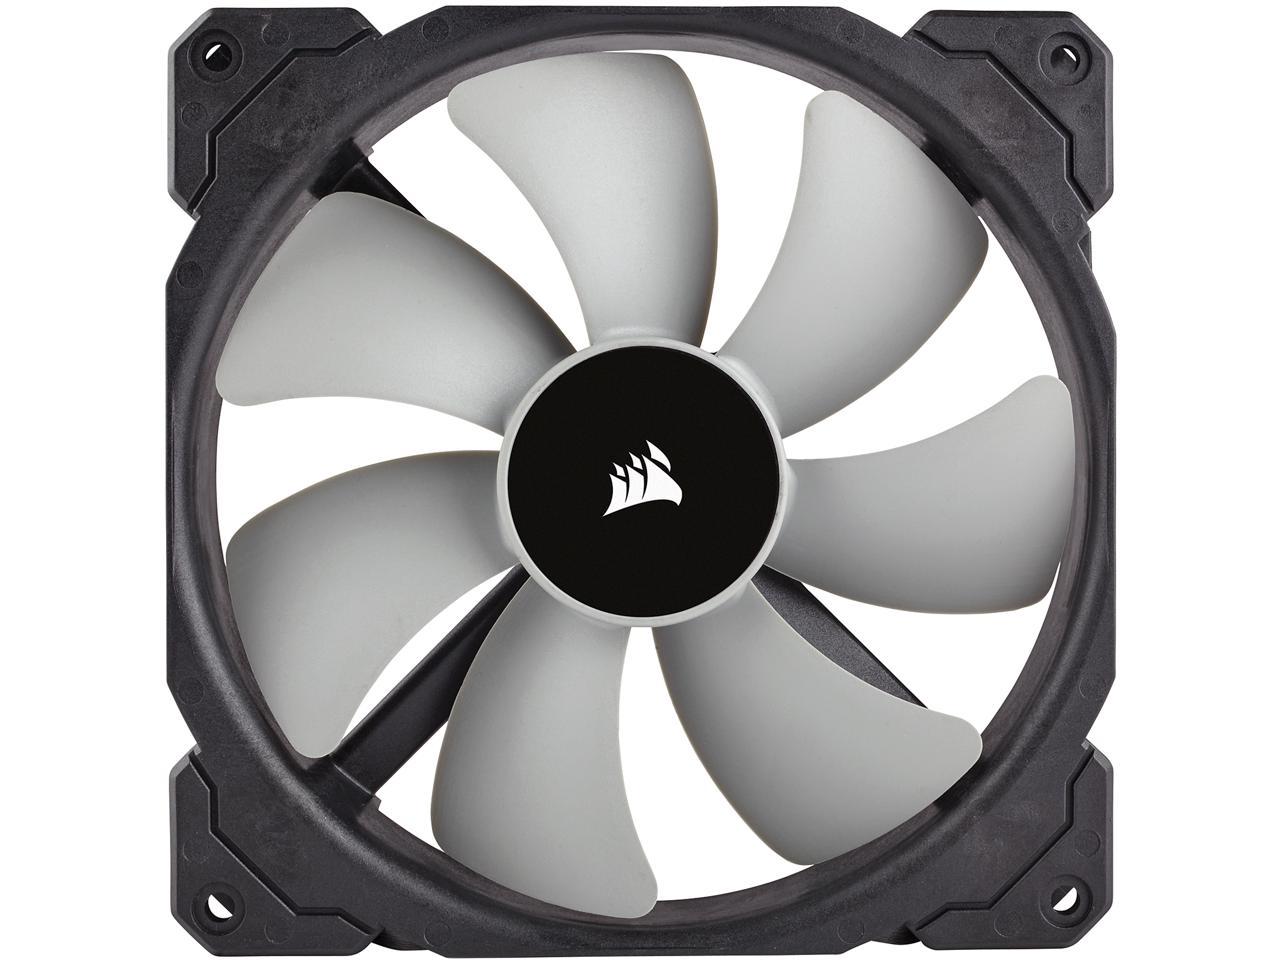 CORSAIR ML140 140mm Premium Magnetic Levitation PWM Case Fan $10.99 after $9 off promo code BFDBY2A47   + FREE SHIPPING